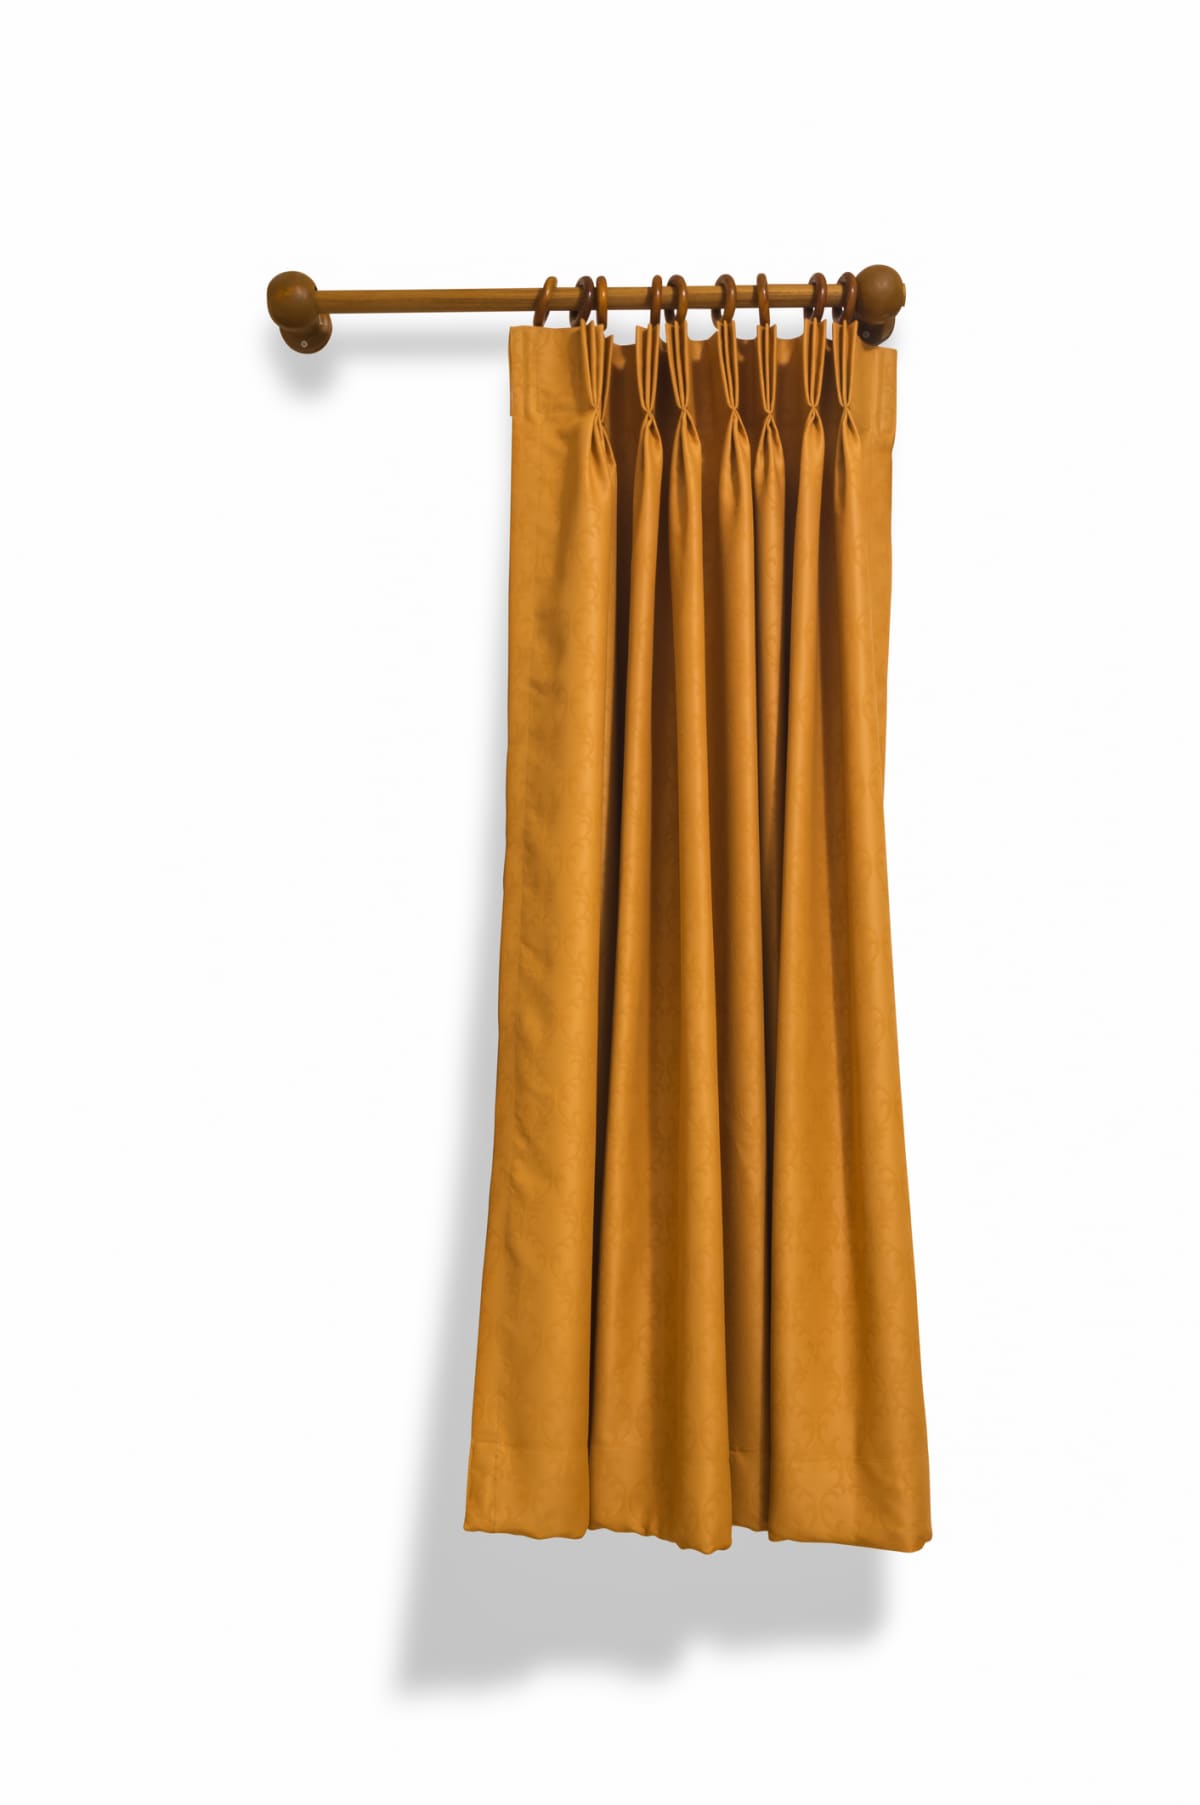 Brown curtains hanging on a rod on a white background